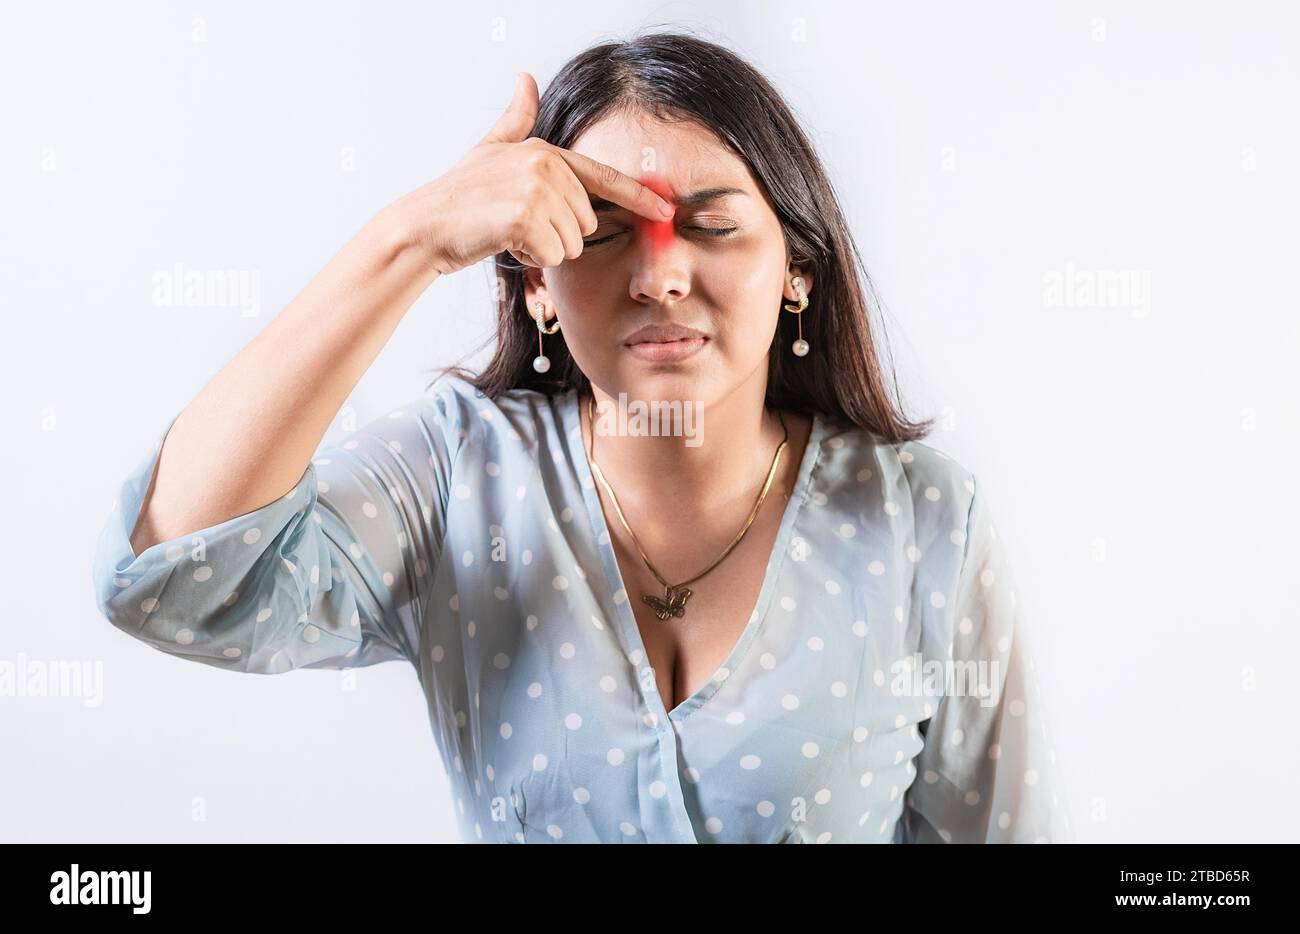 Person with nasal bridge pain, Girl with nasal bridge headache. Sinus pain concept. Young woman with pain touching nose Stock Photo